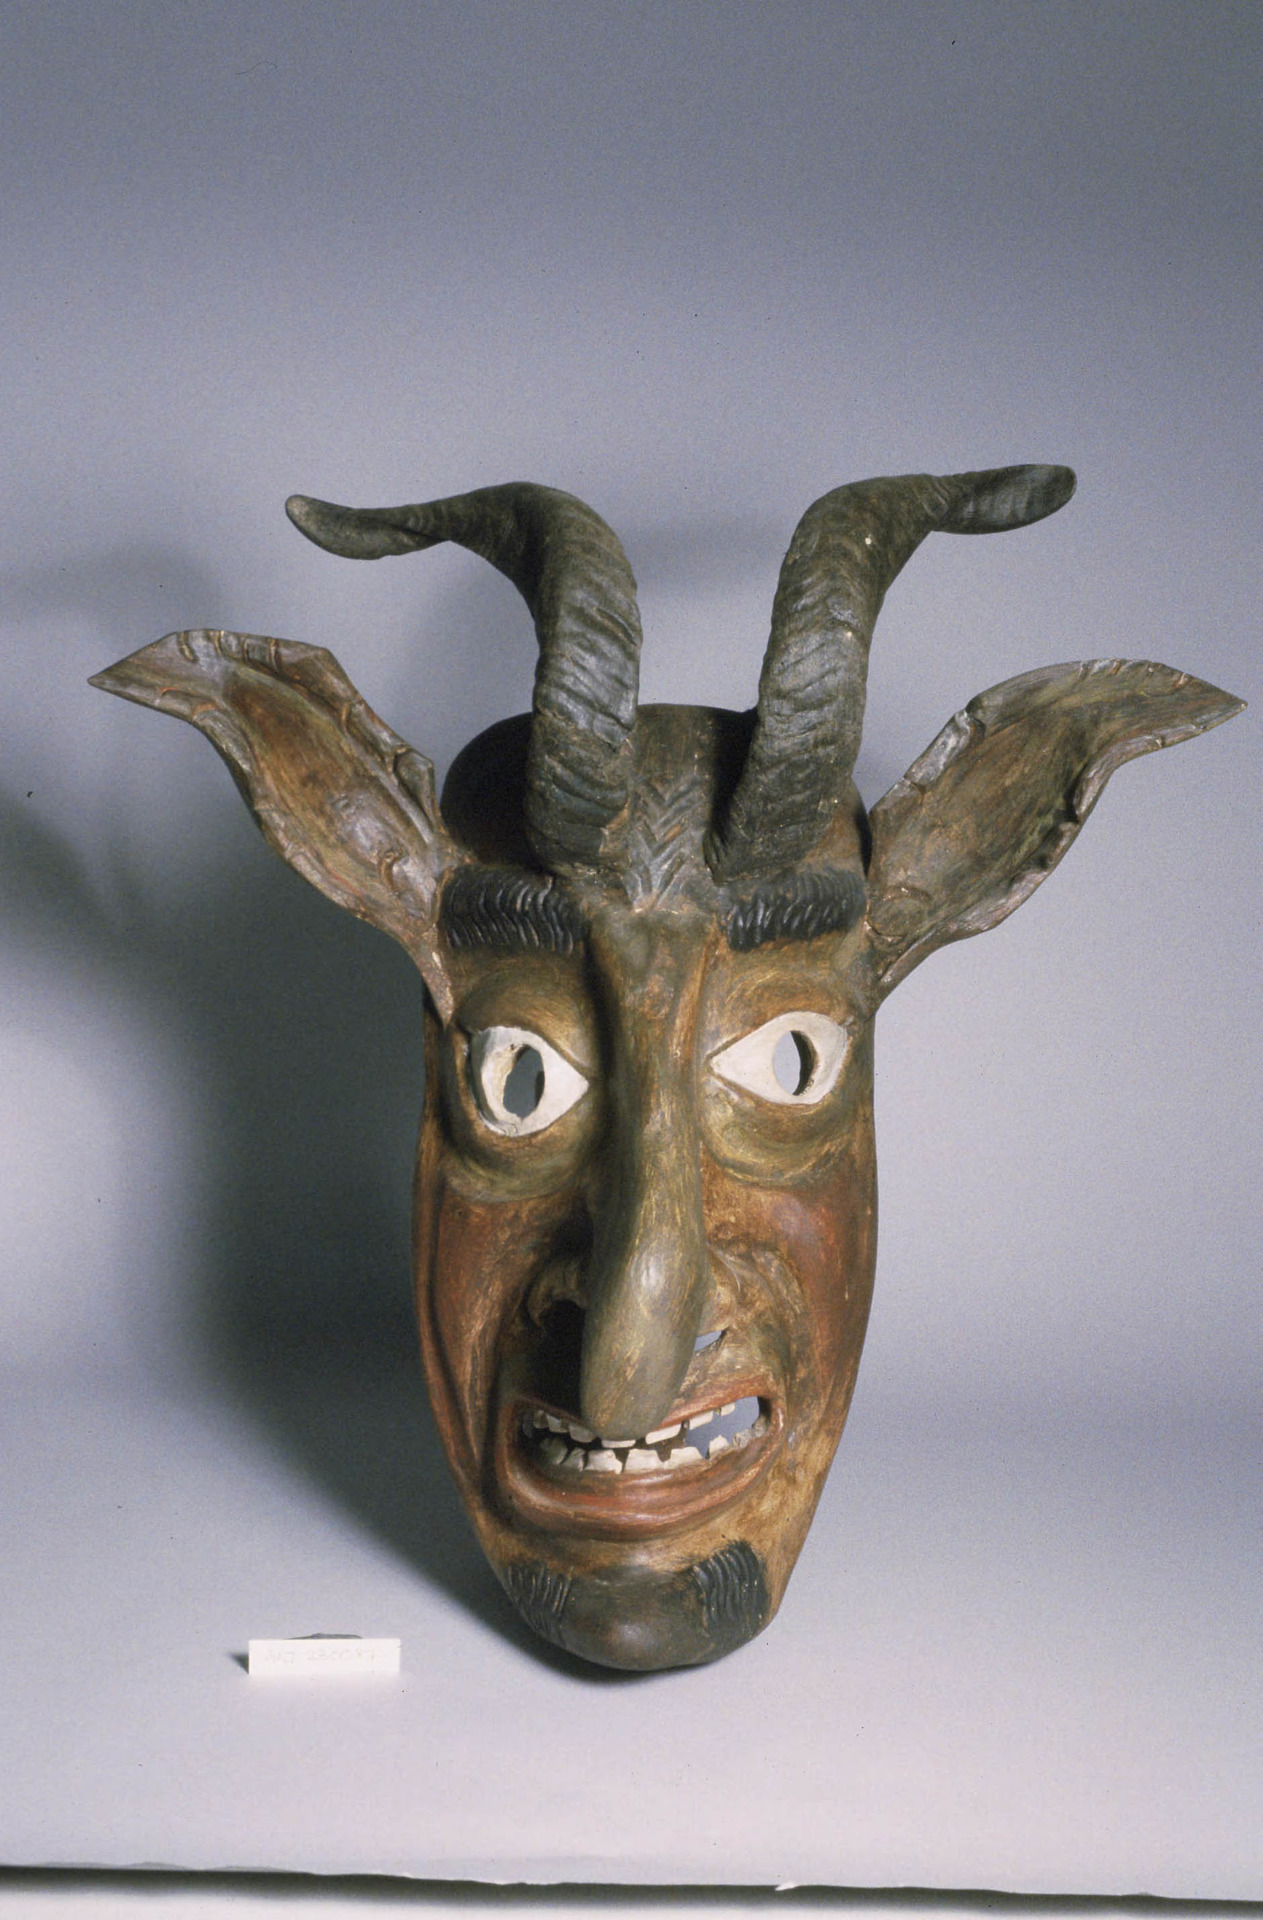 Carved wooden mask resembling an anthropomorphic goat. Mask has a ...